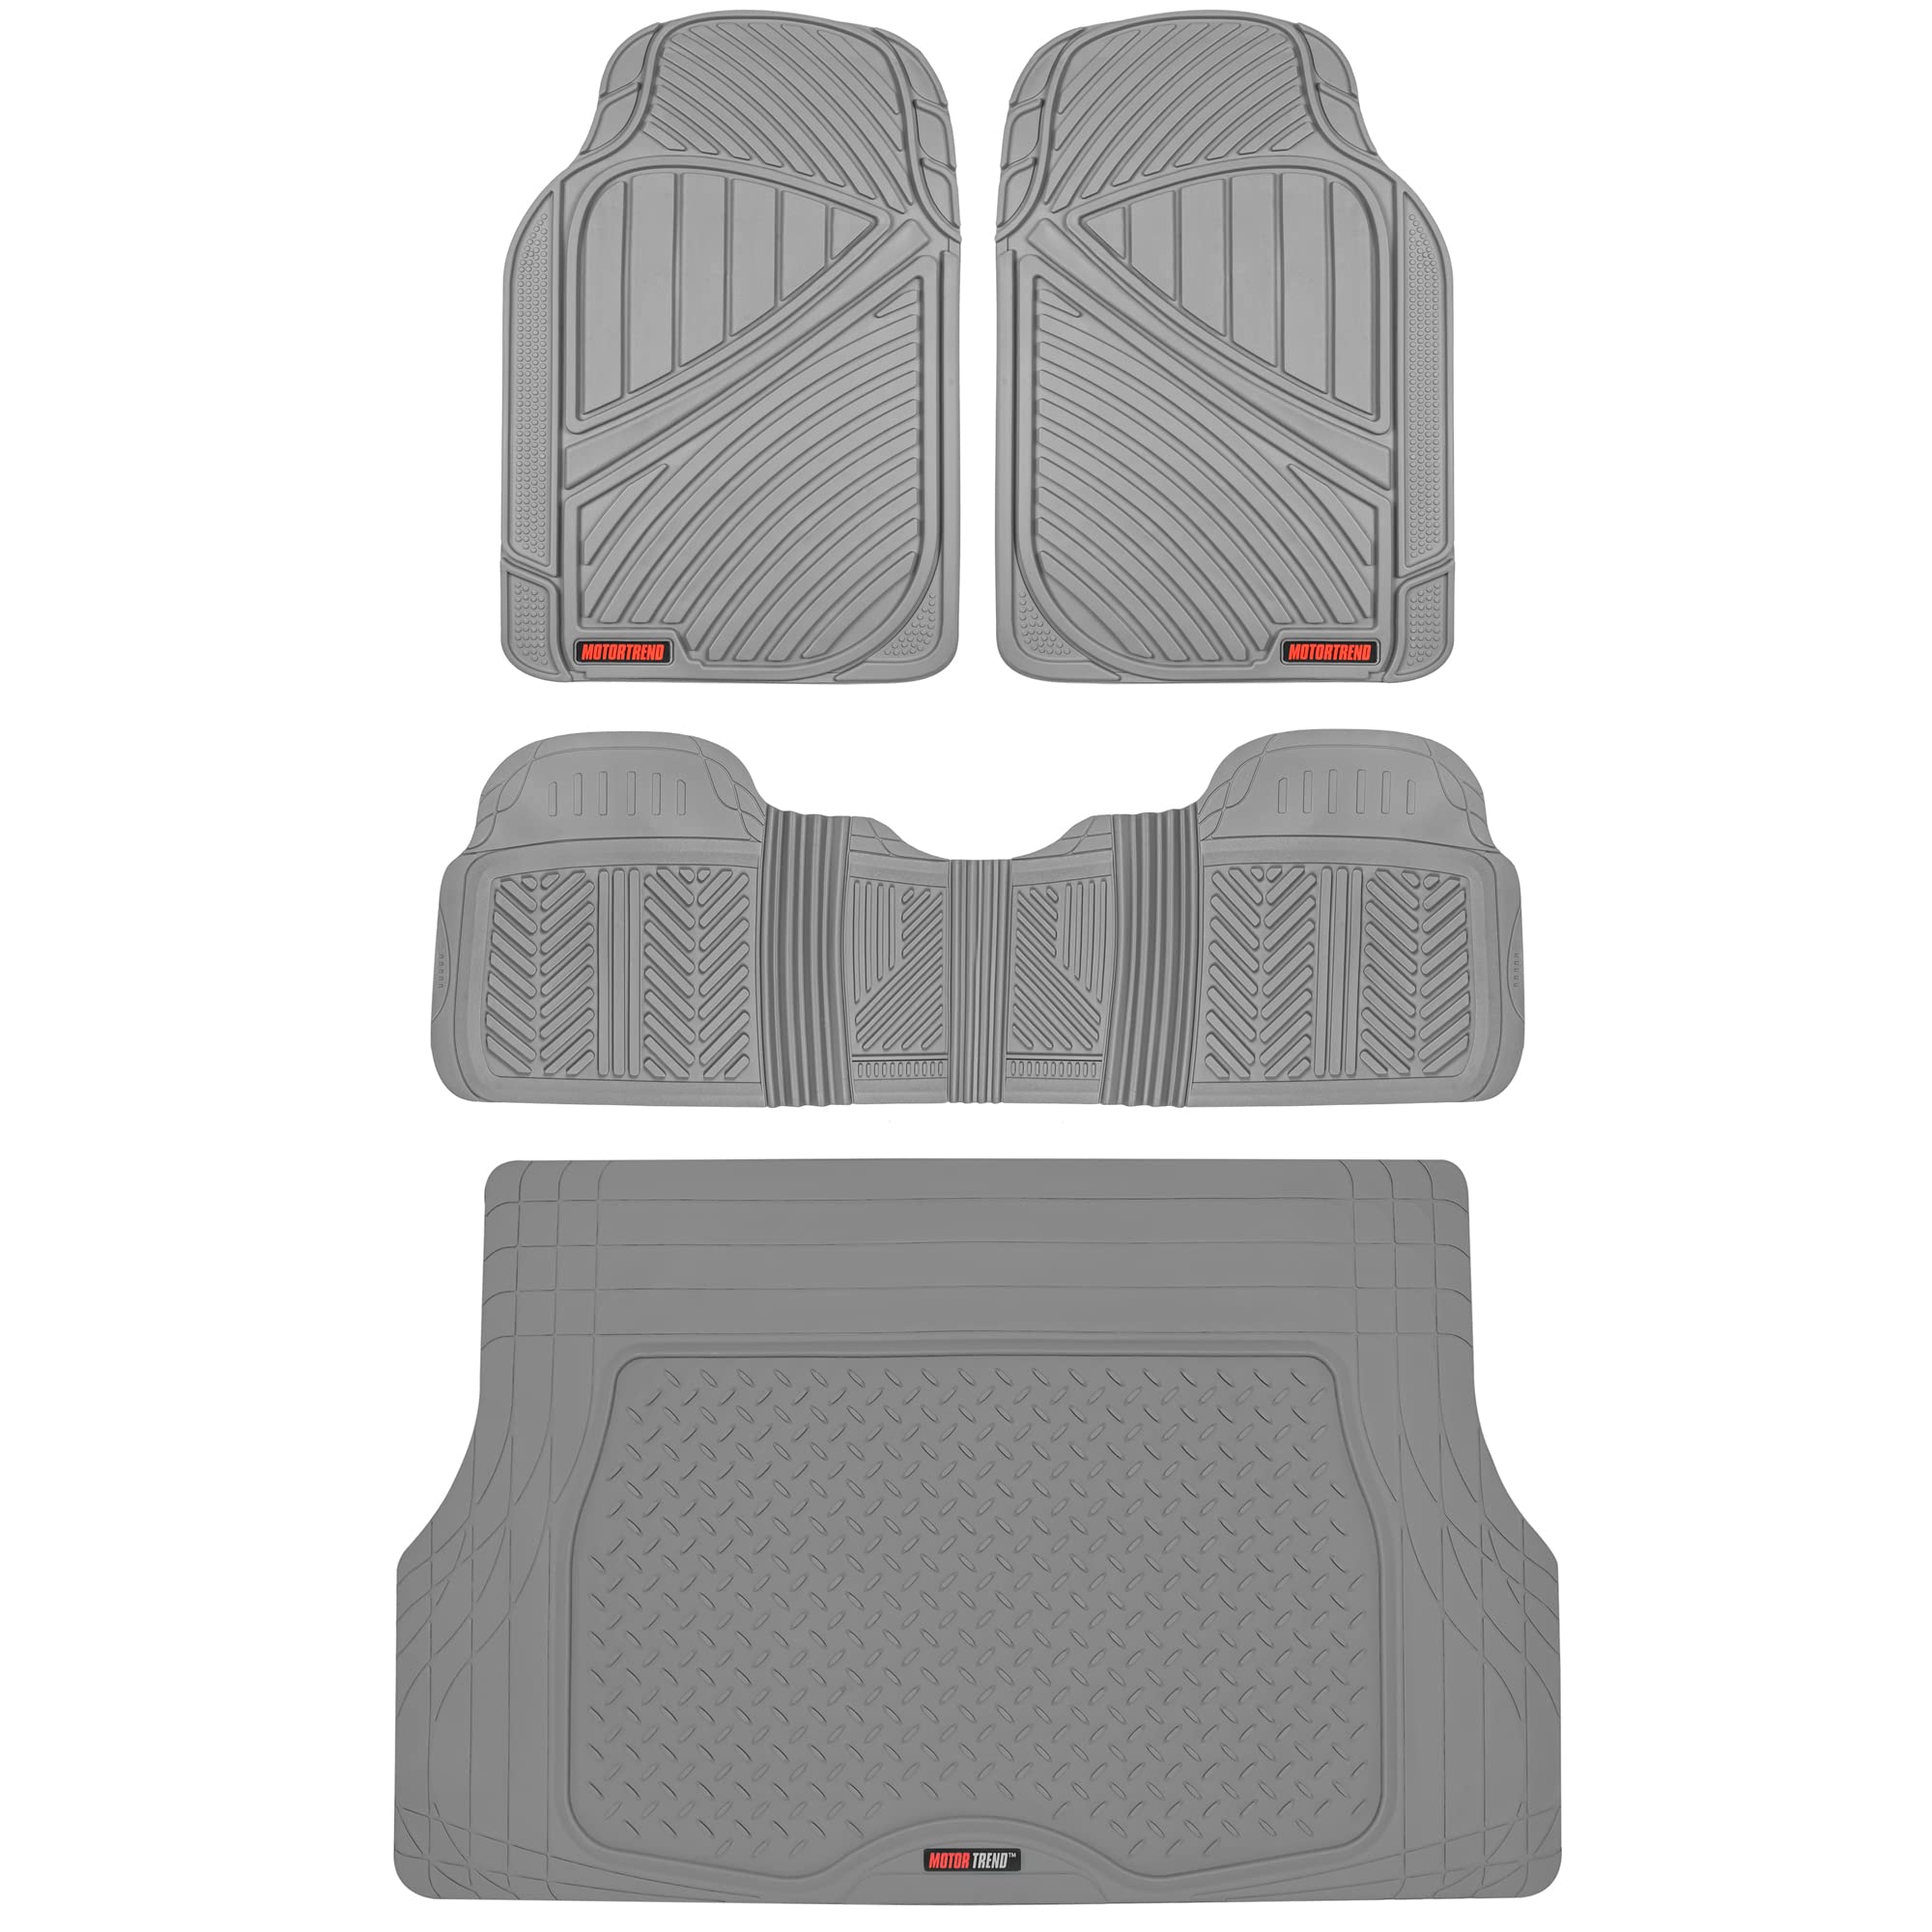 13 Incredible Floor Mats For Cars For 2023 1696167724 